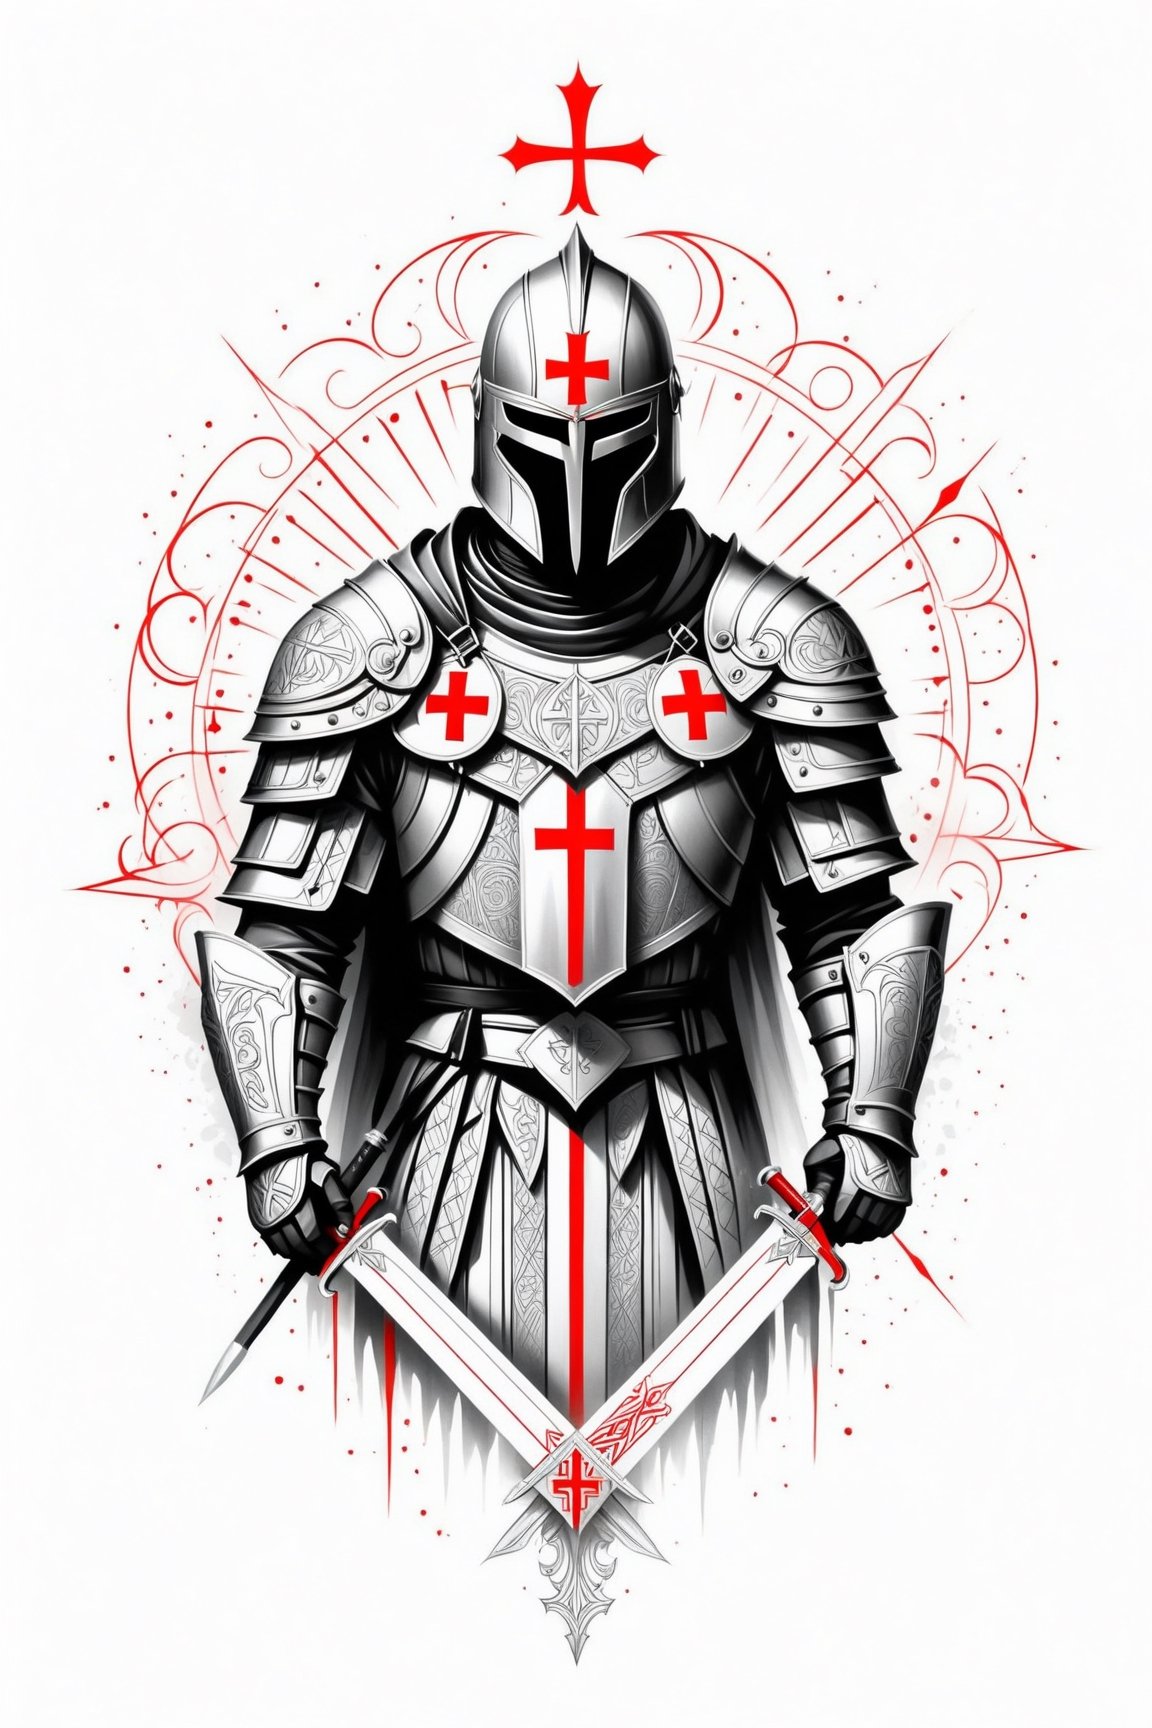 lineart tattoo design, Knight Templar, geometric forms with red cross superimpossed, ((drawing lines)), drawing in black and withe, thick lines, filagree, realistic, silkscreen dot pattern in background, white background, monster, Leonardo Style,Pencil Draw,Fashion Illustration,Flat vector art,pencil sketch